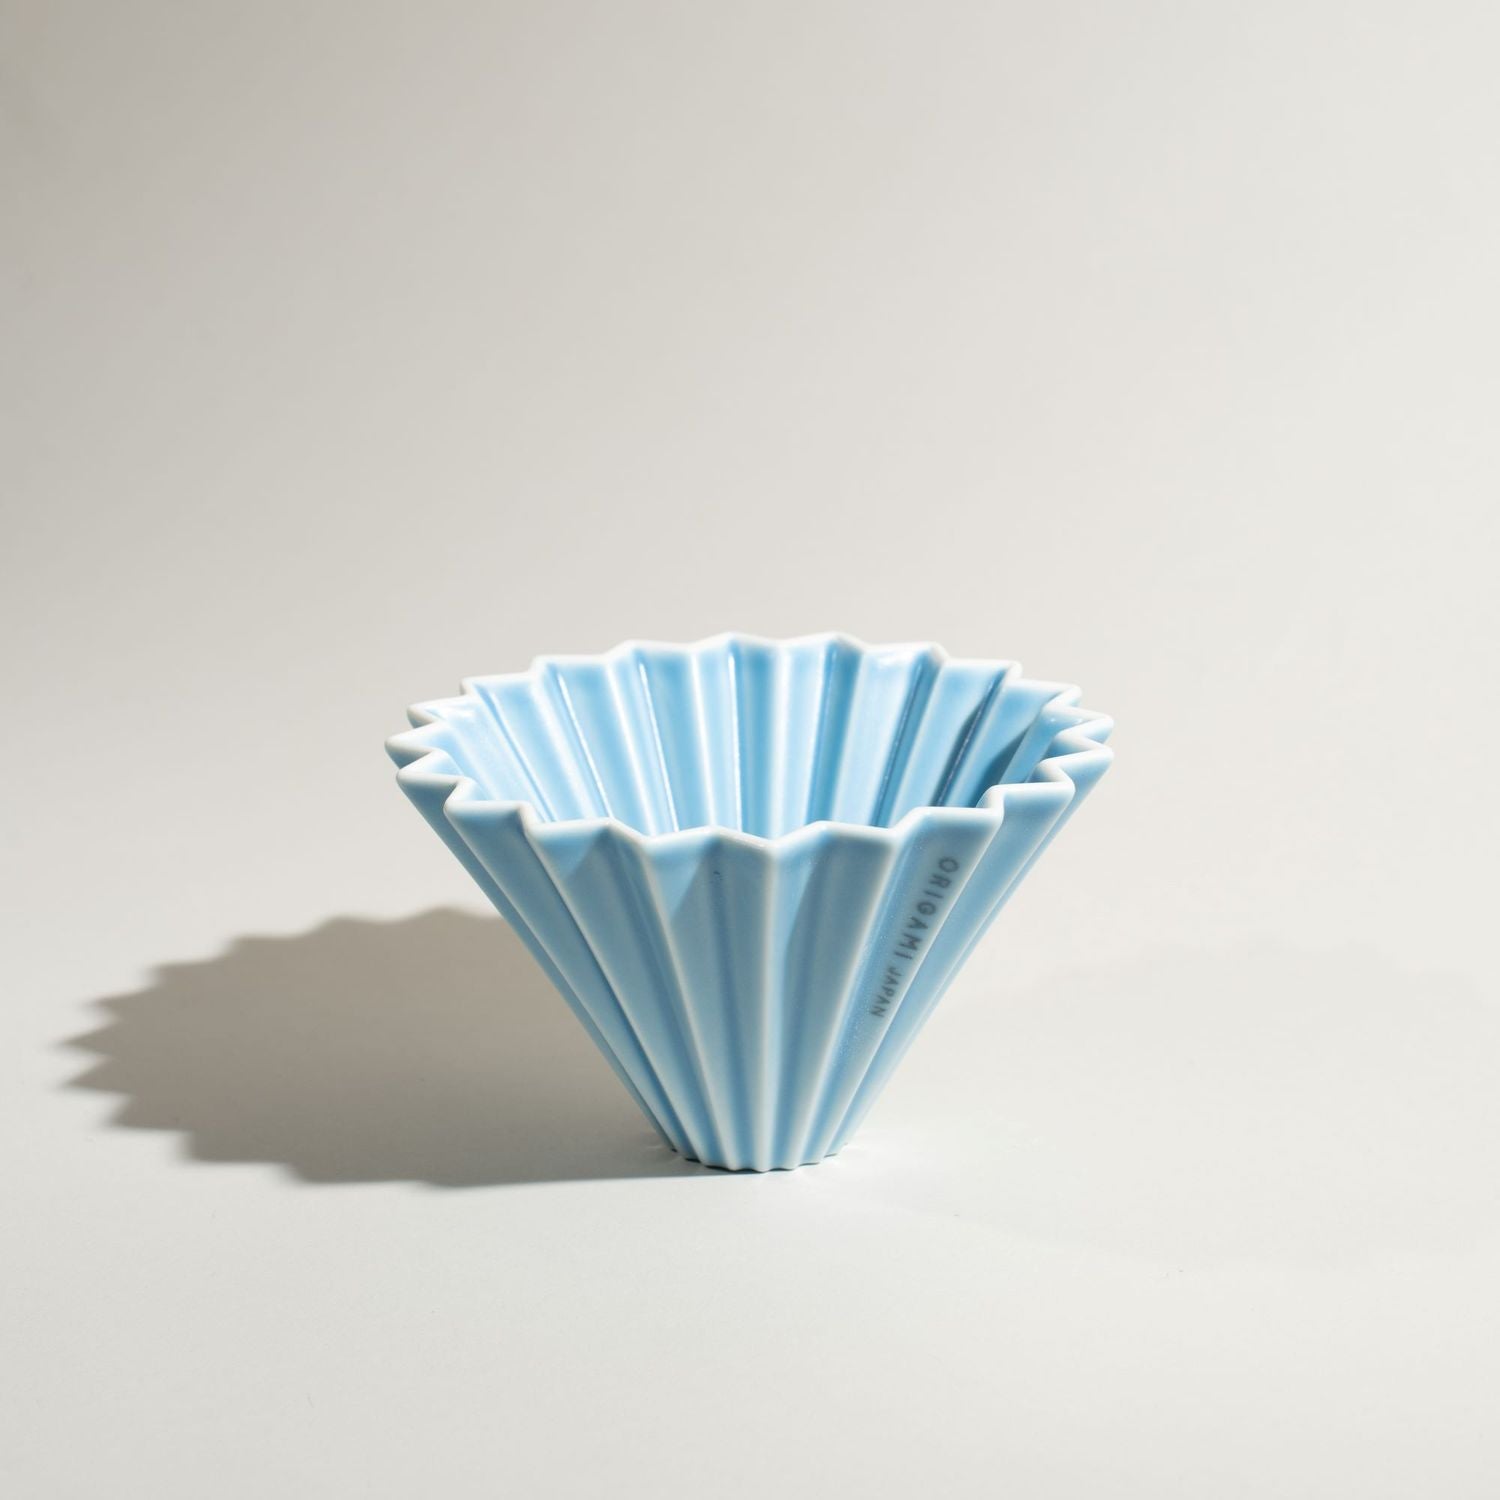 Blue Origami dripper, made in Japan with Mino porcelain, designed for the most demanding baristas